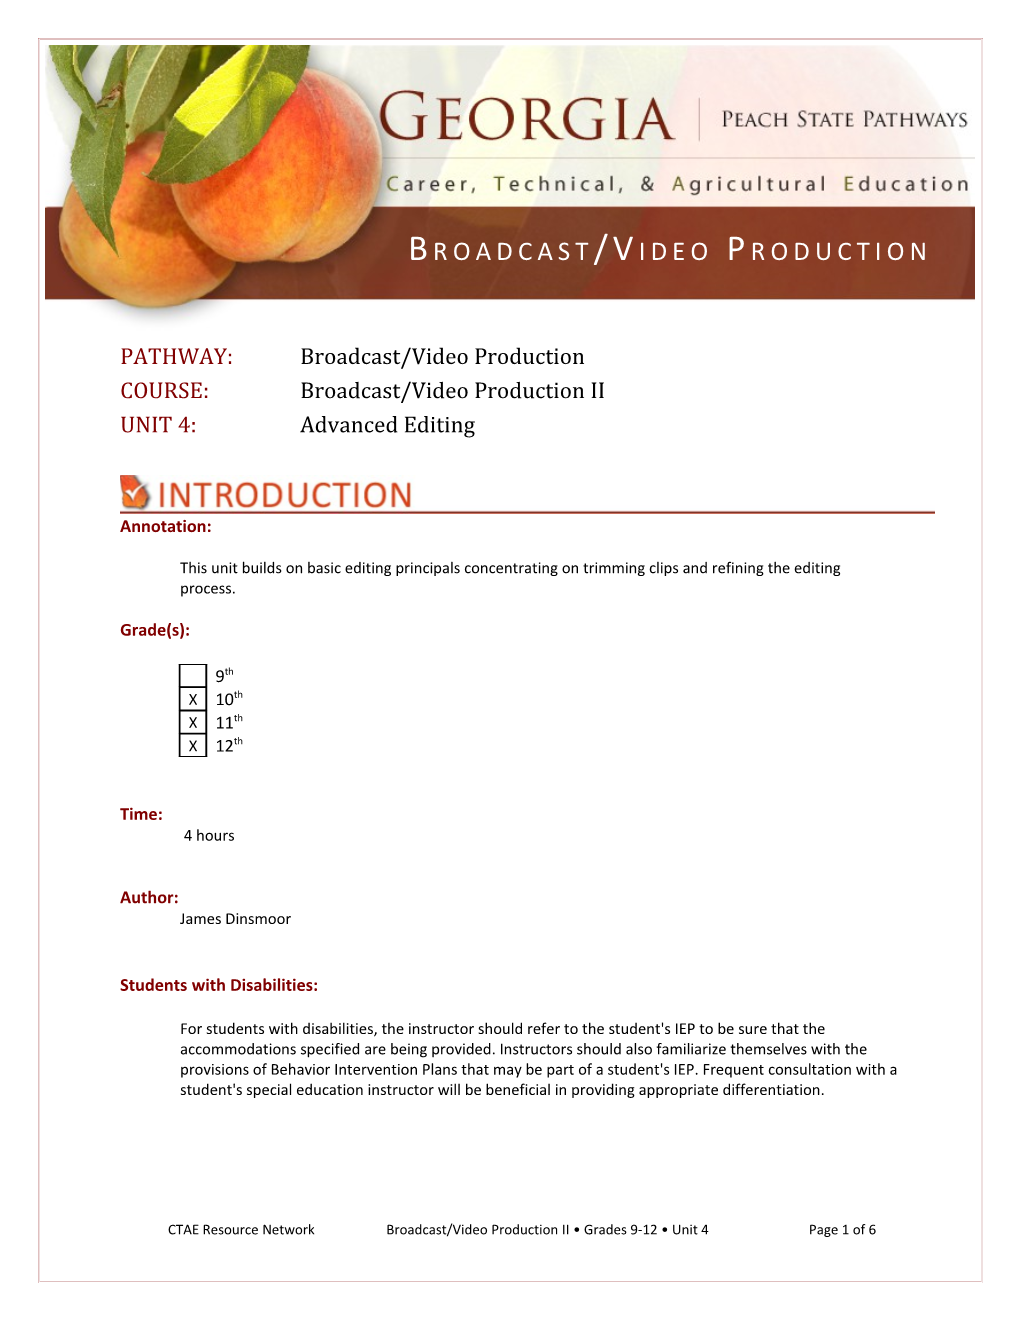 PATHWAY: Broadcast/Video Production